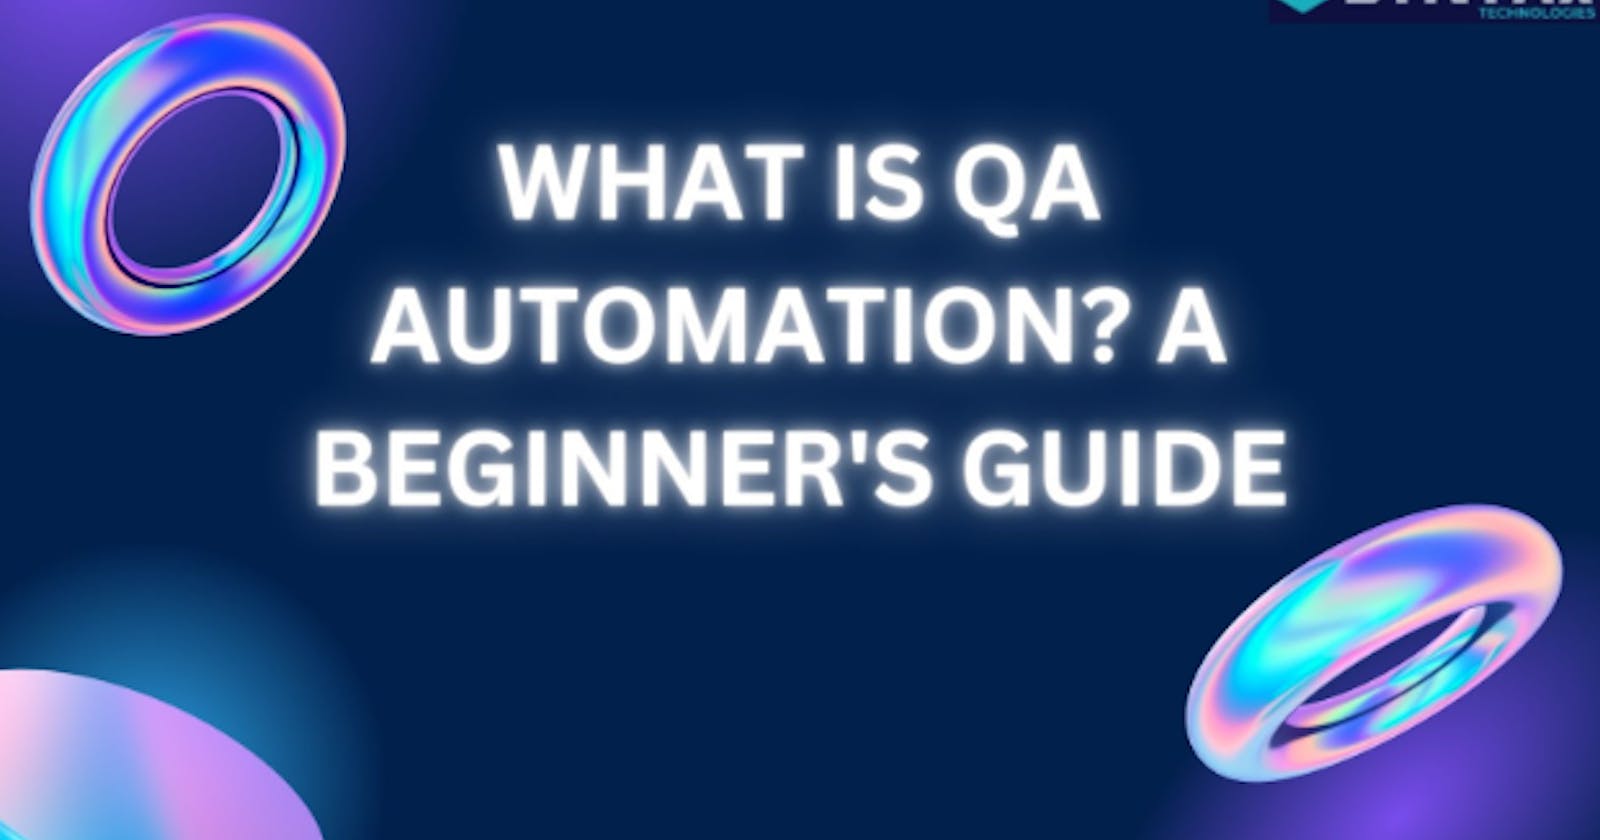 What Is Qa Automation?